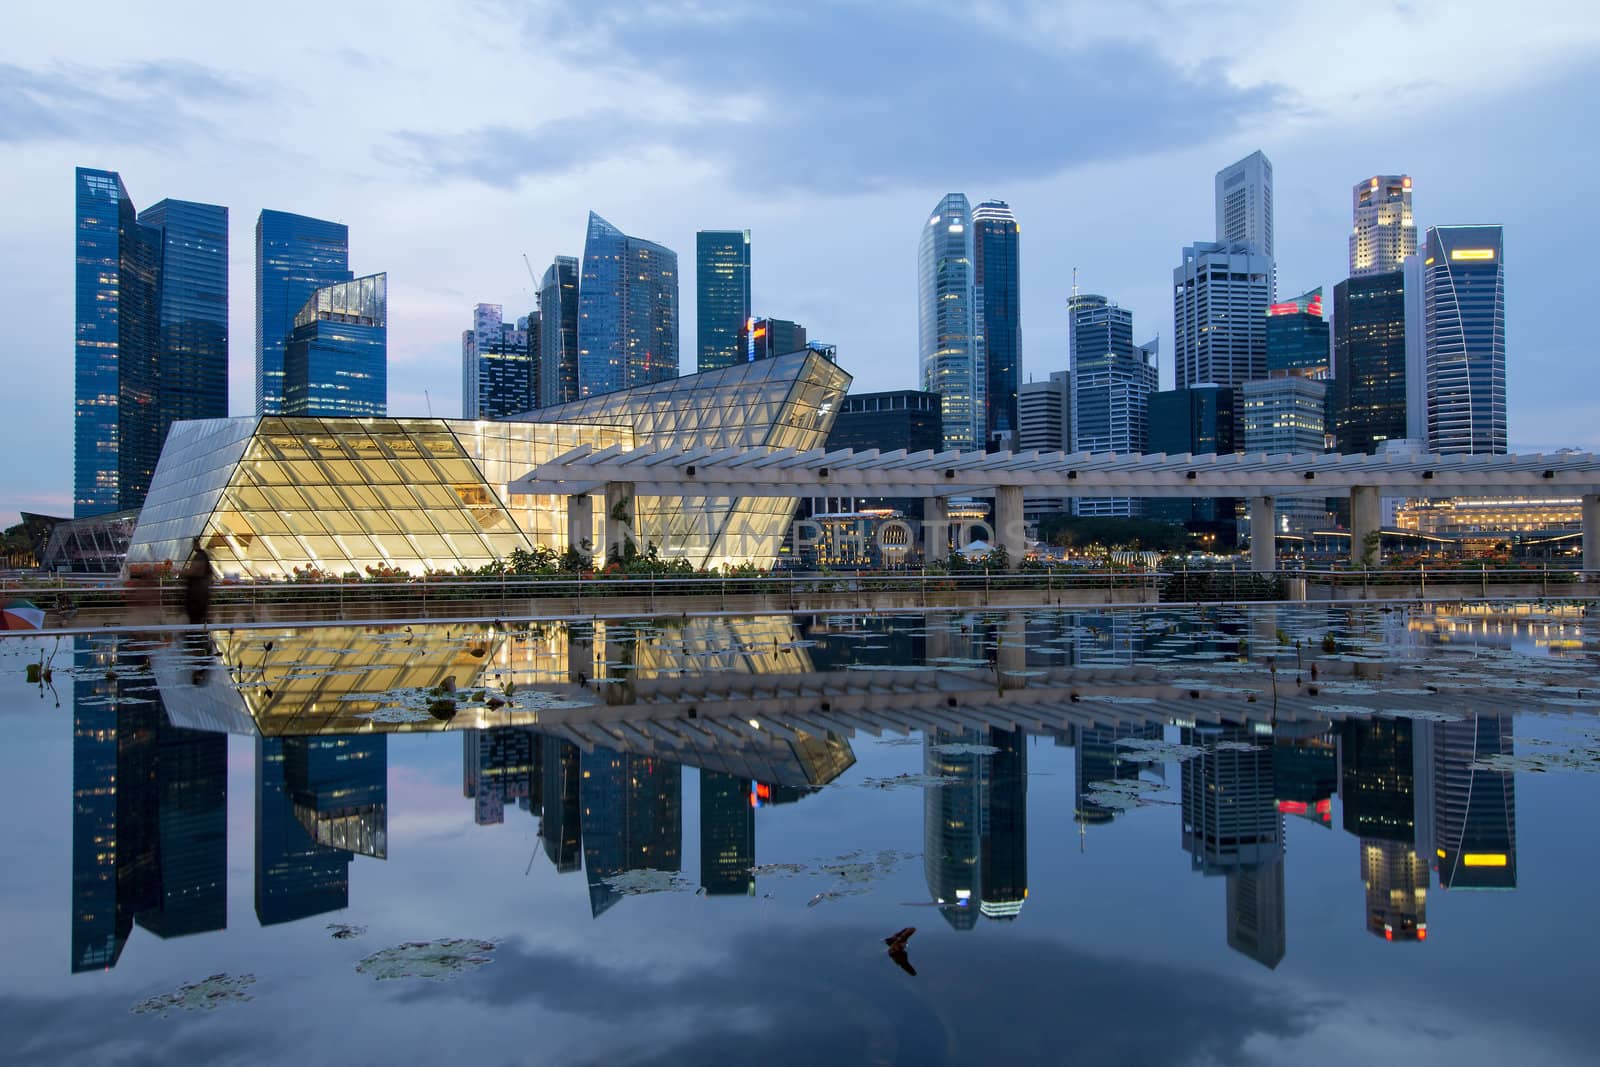 Reflection of Singapore City Skyline at Blue Hour by jpldesigns